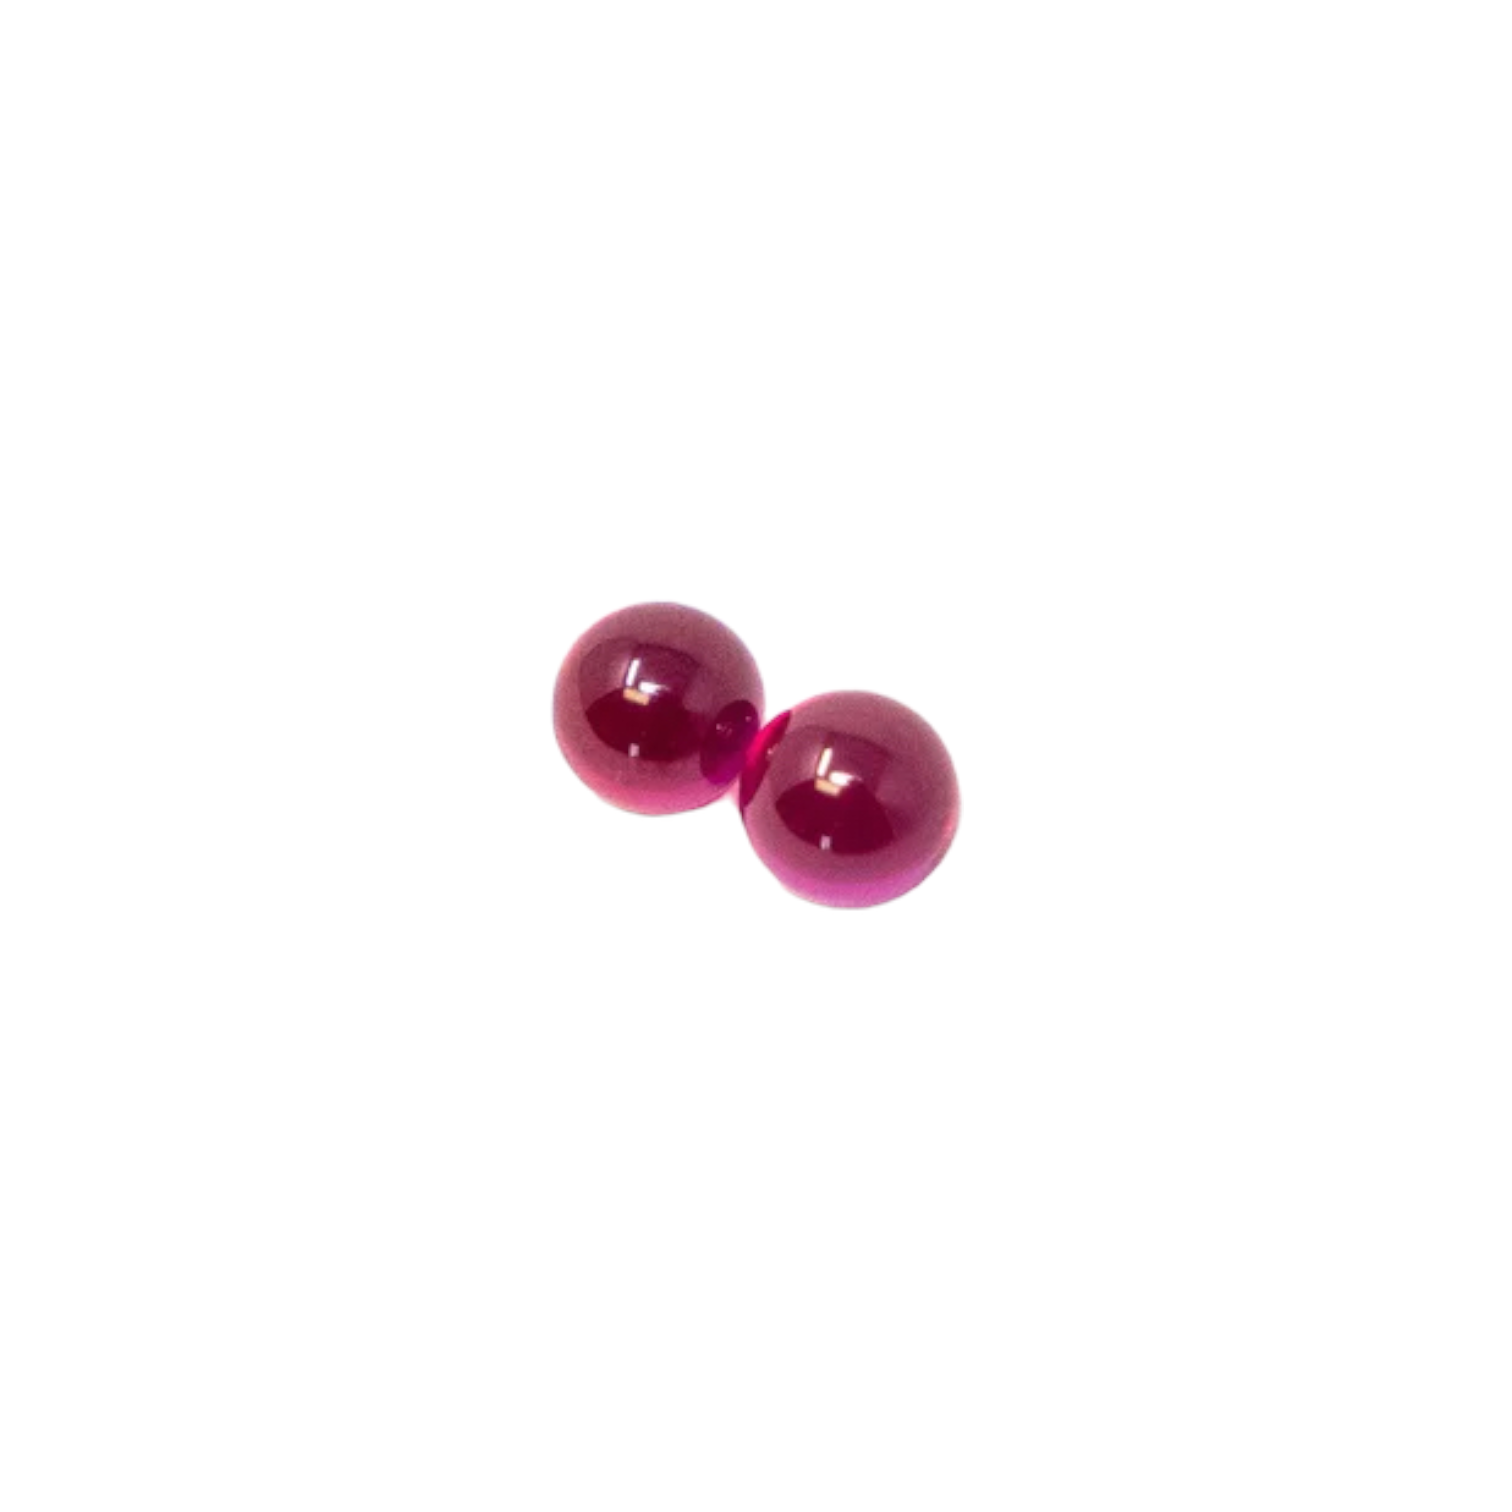 Ruby Pearl Co. - 5mm Ruby Pearls - 2ct